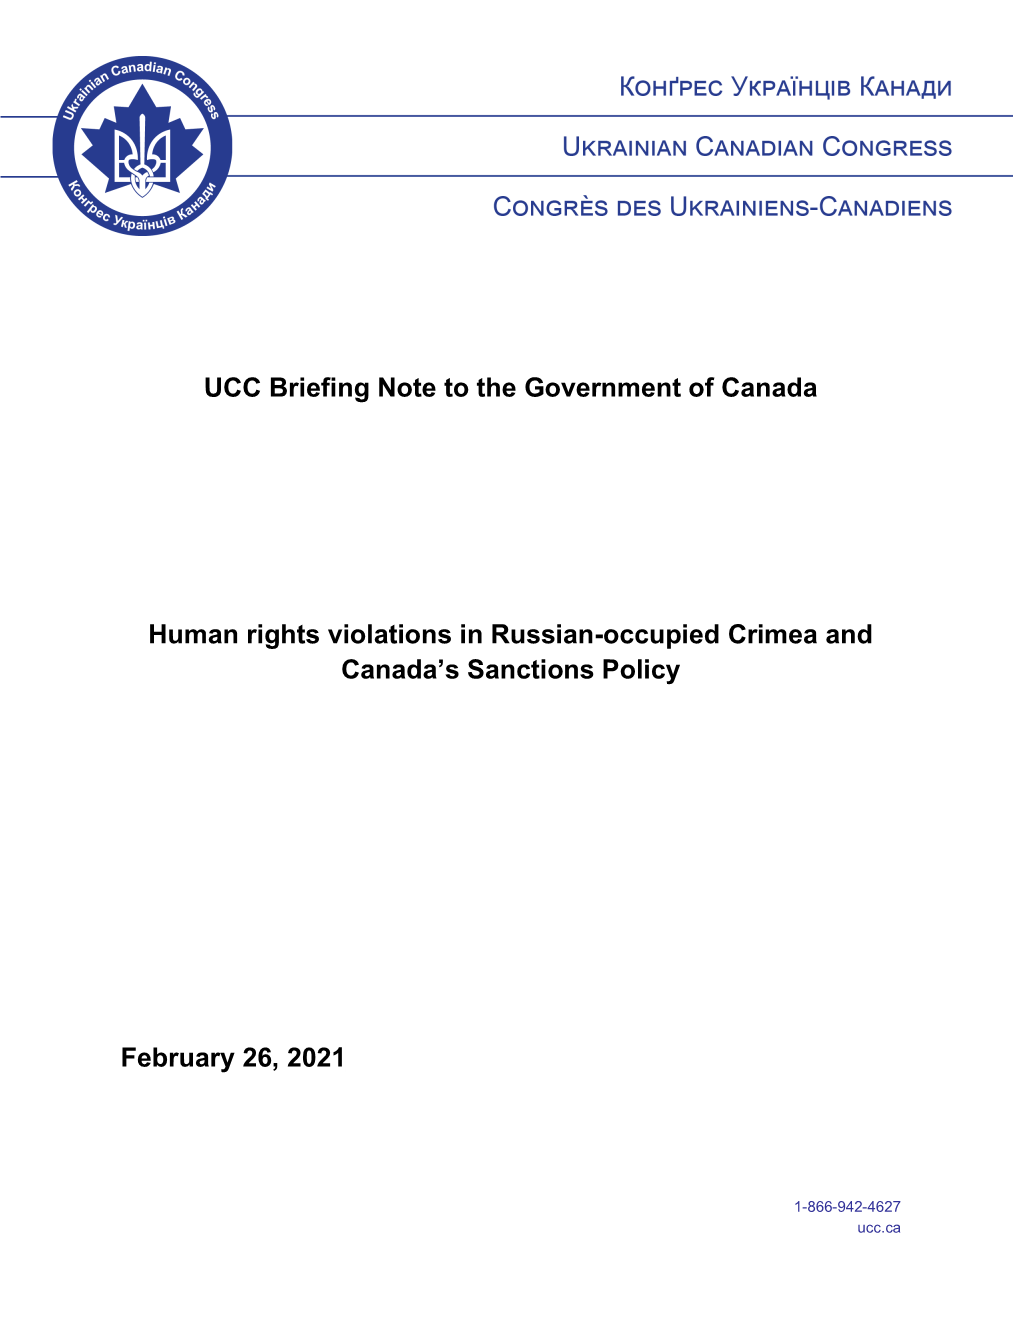 UCC Briefing Note to the Government of Canada Human Rights